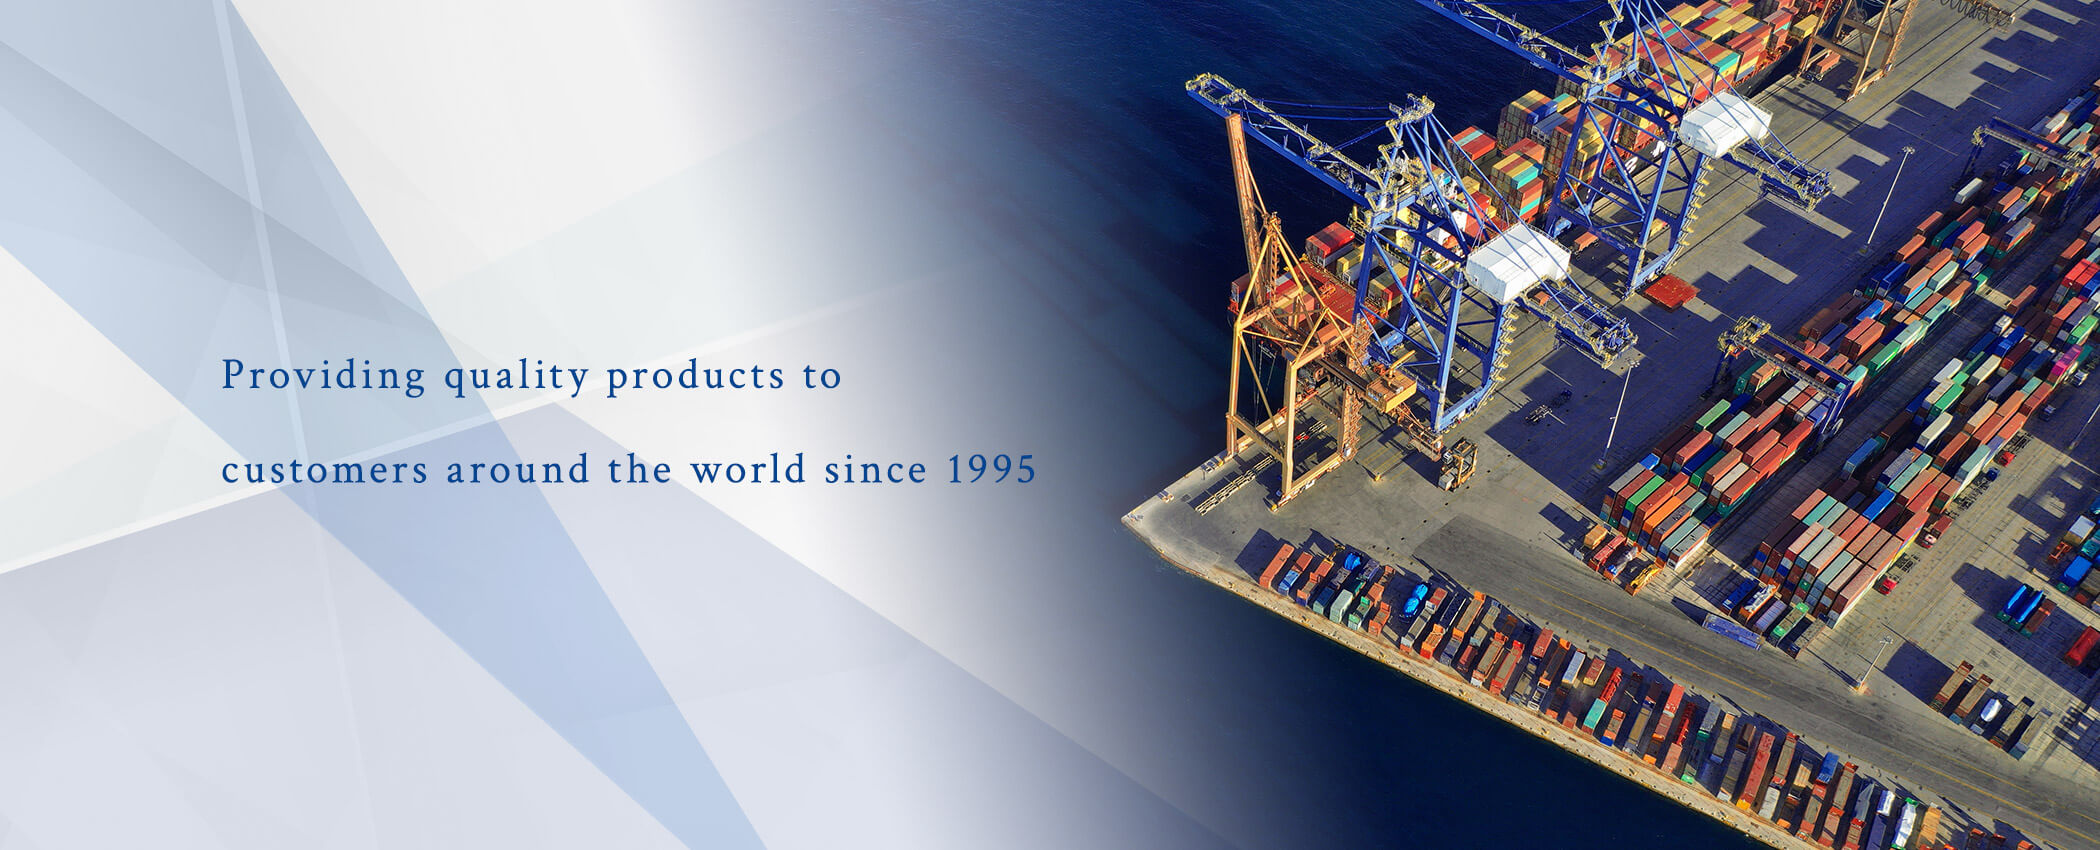 Providing quality products to customers around the world since 1995